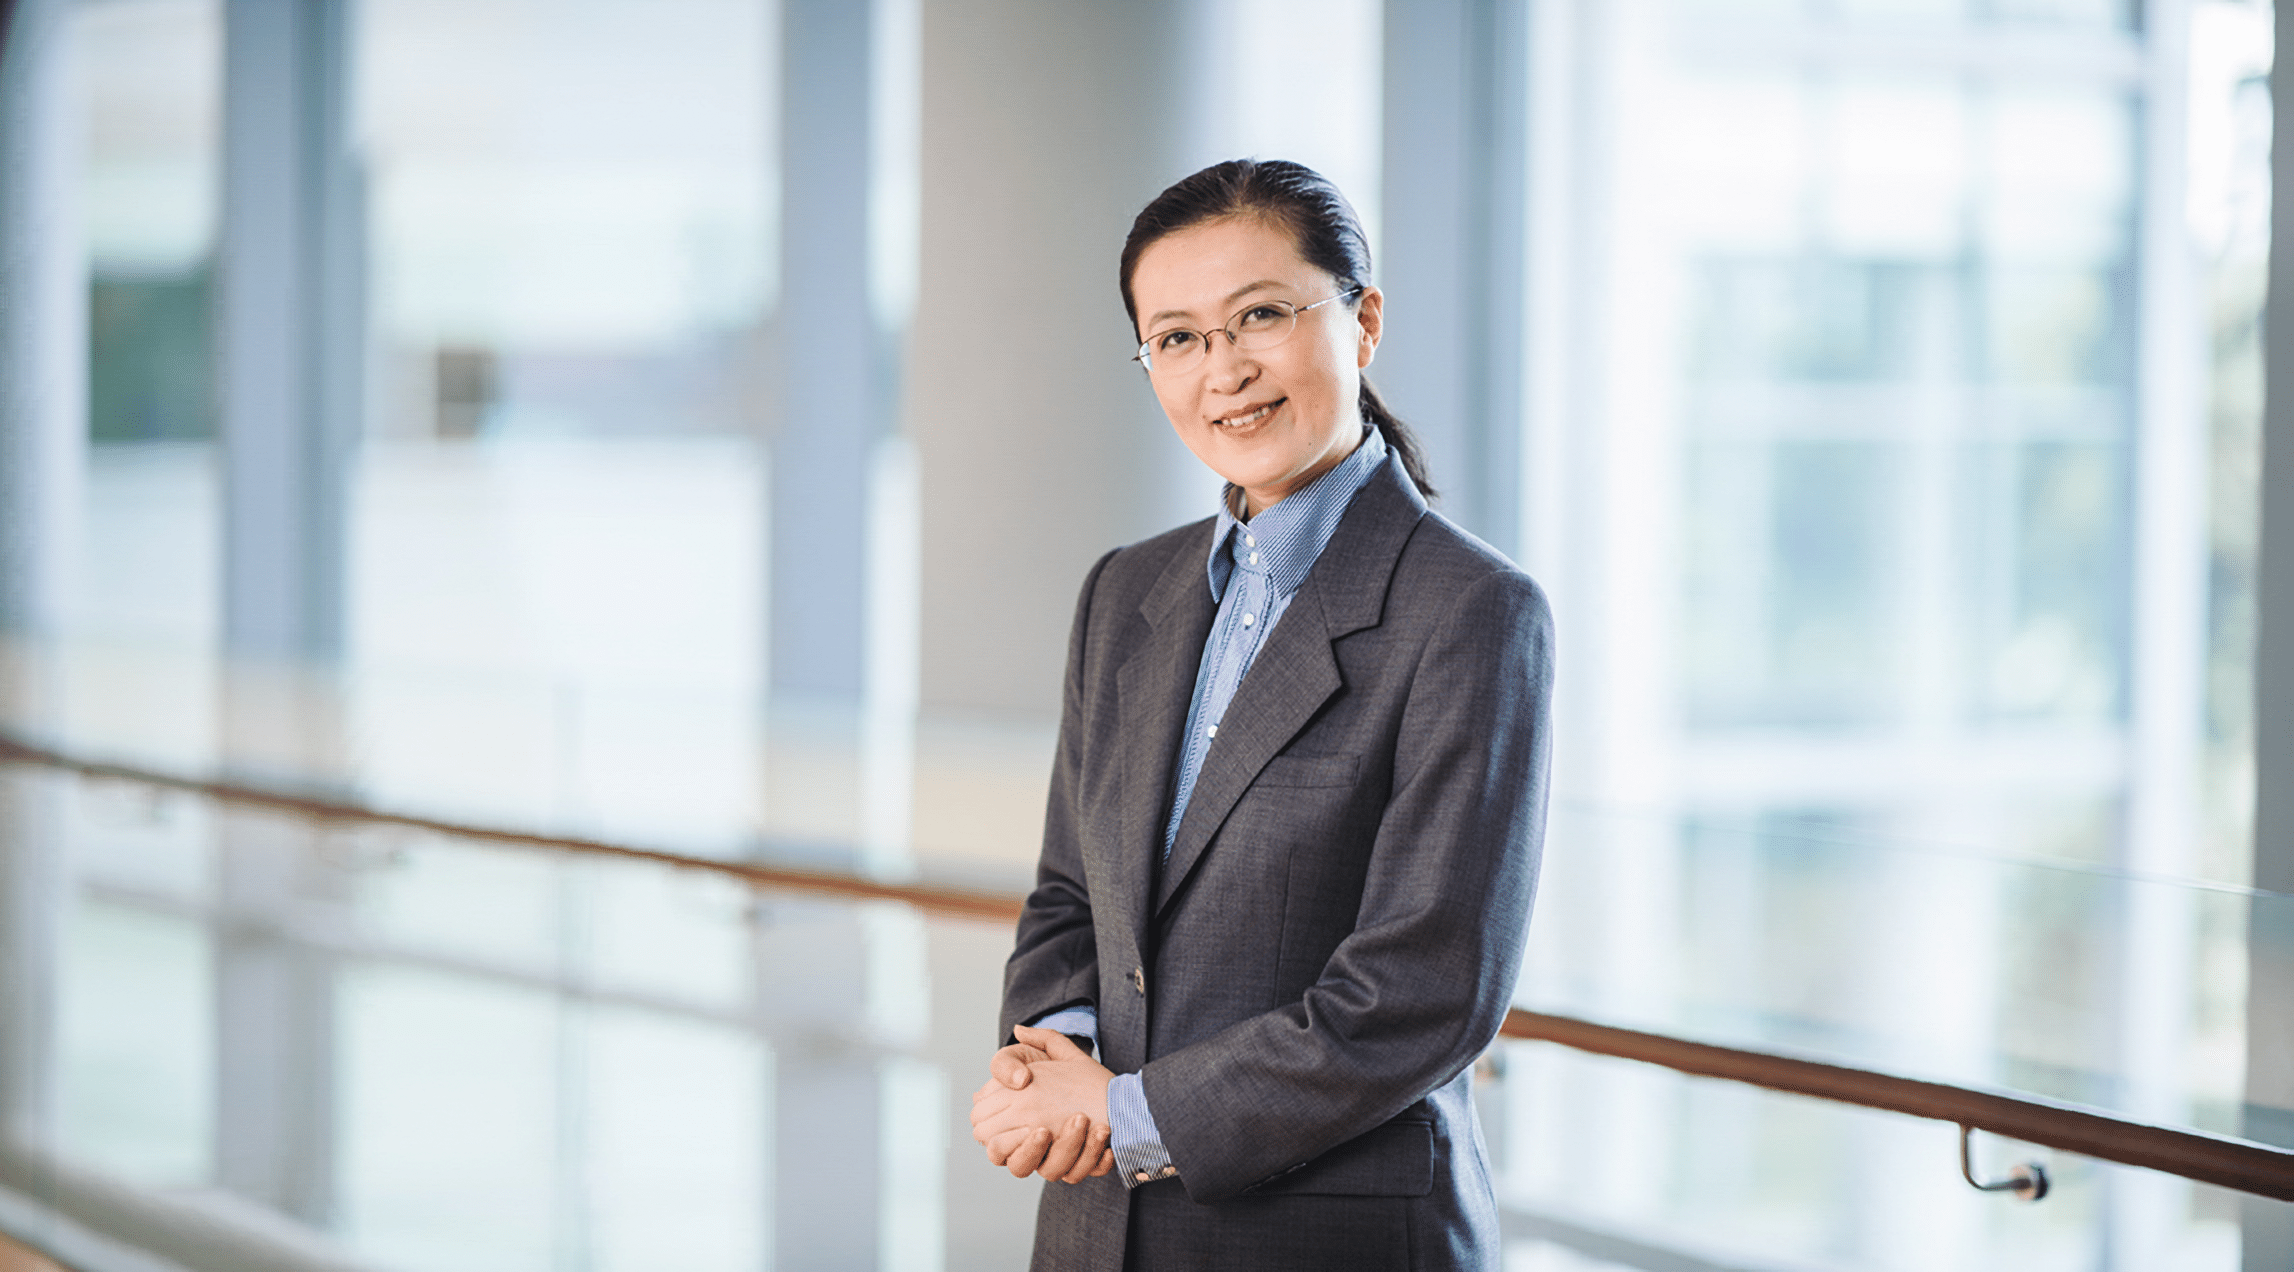 Prof Liu Bin, who joined NUS in 2005, is a leader in the field of organic functional materials.